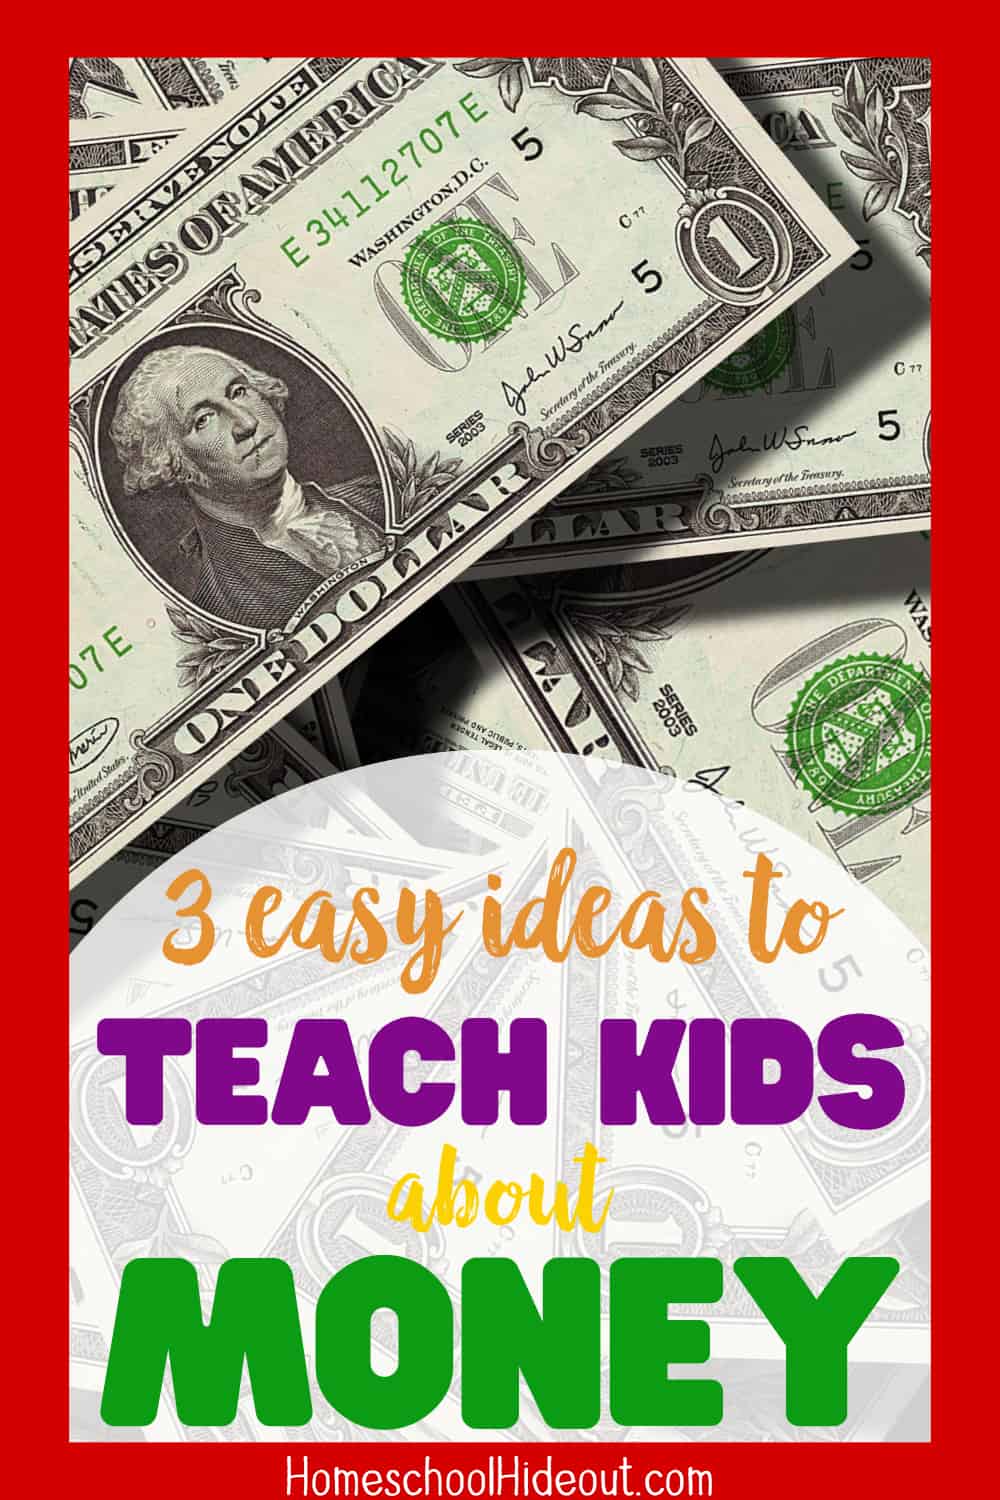 Teaching kids about money can seem impossible but with a few easy ideas, you can show them how to be financial responsible, no matter how old they are!